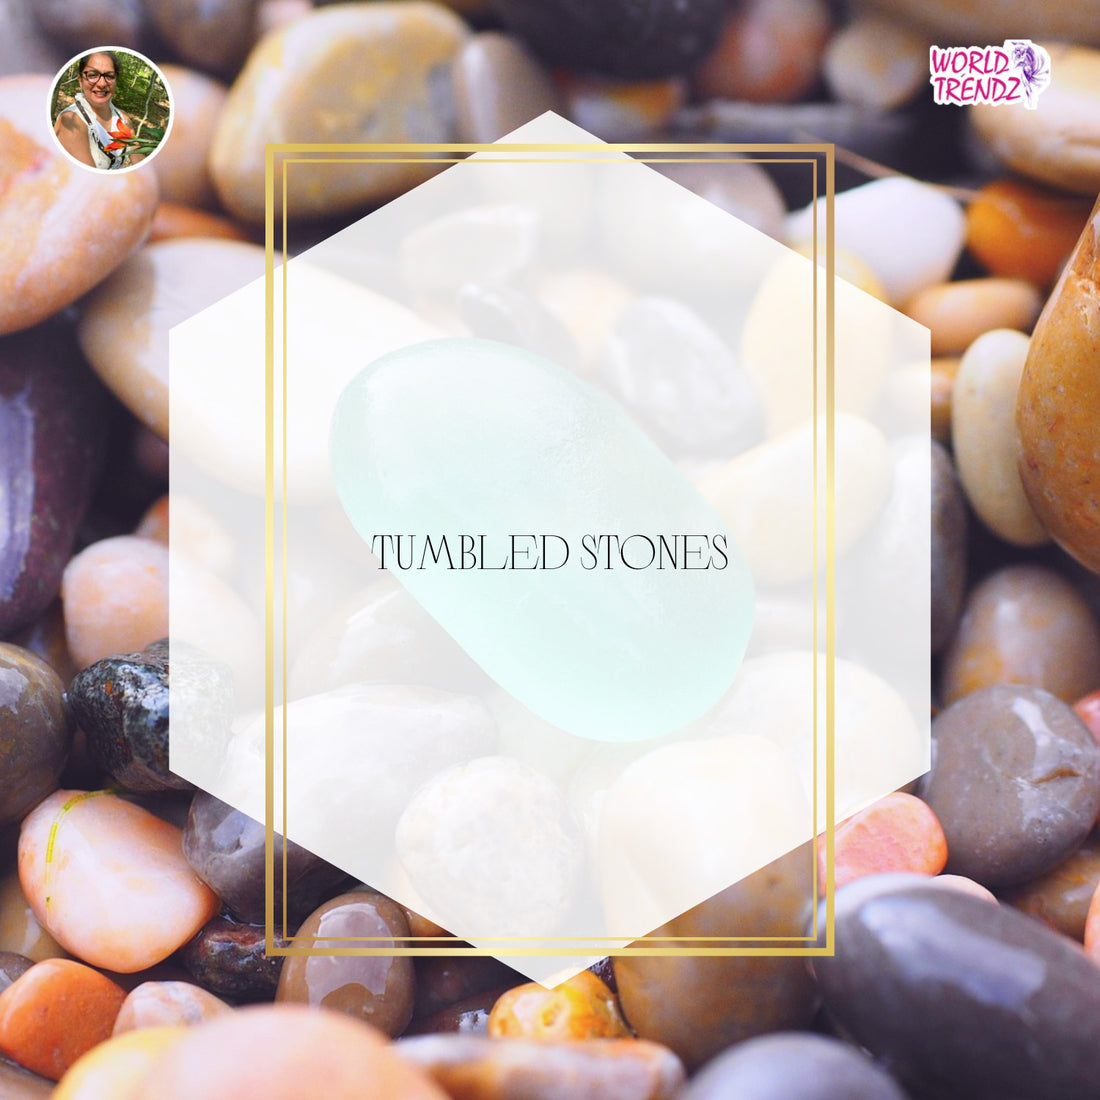 Surprising Facts About Tumbled Stones